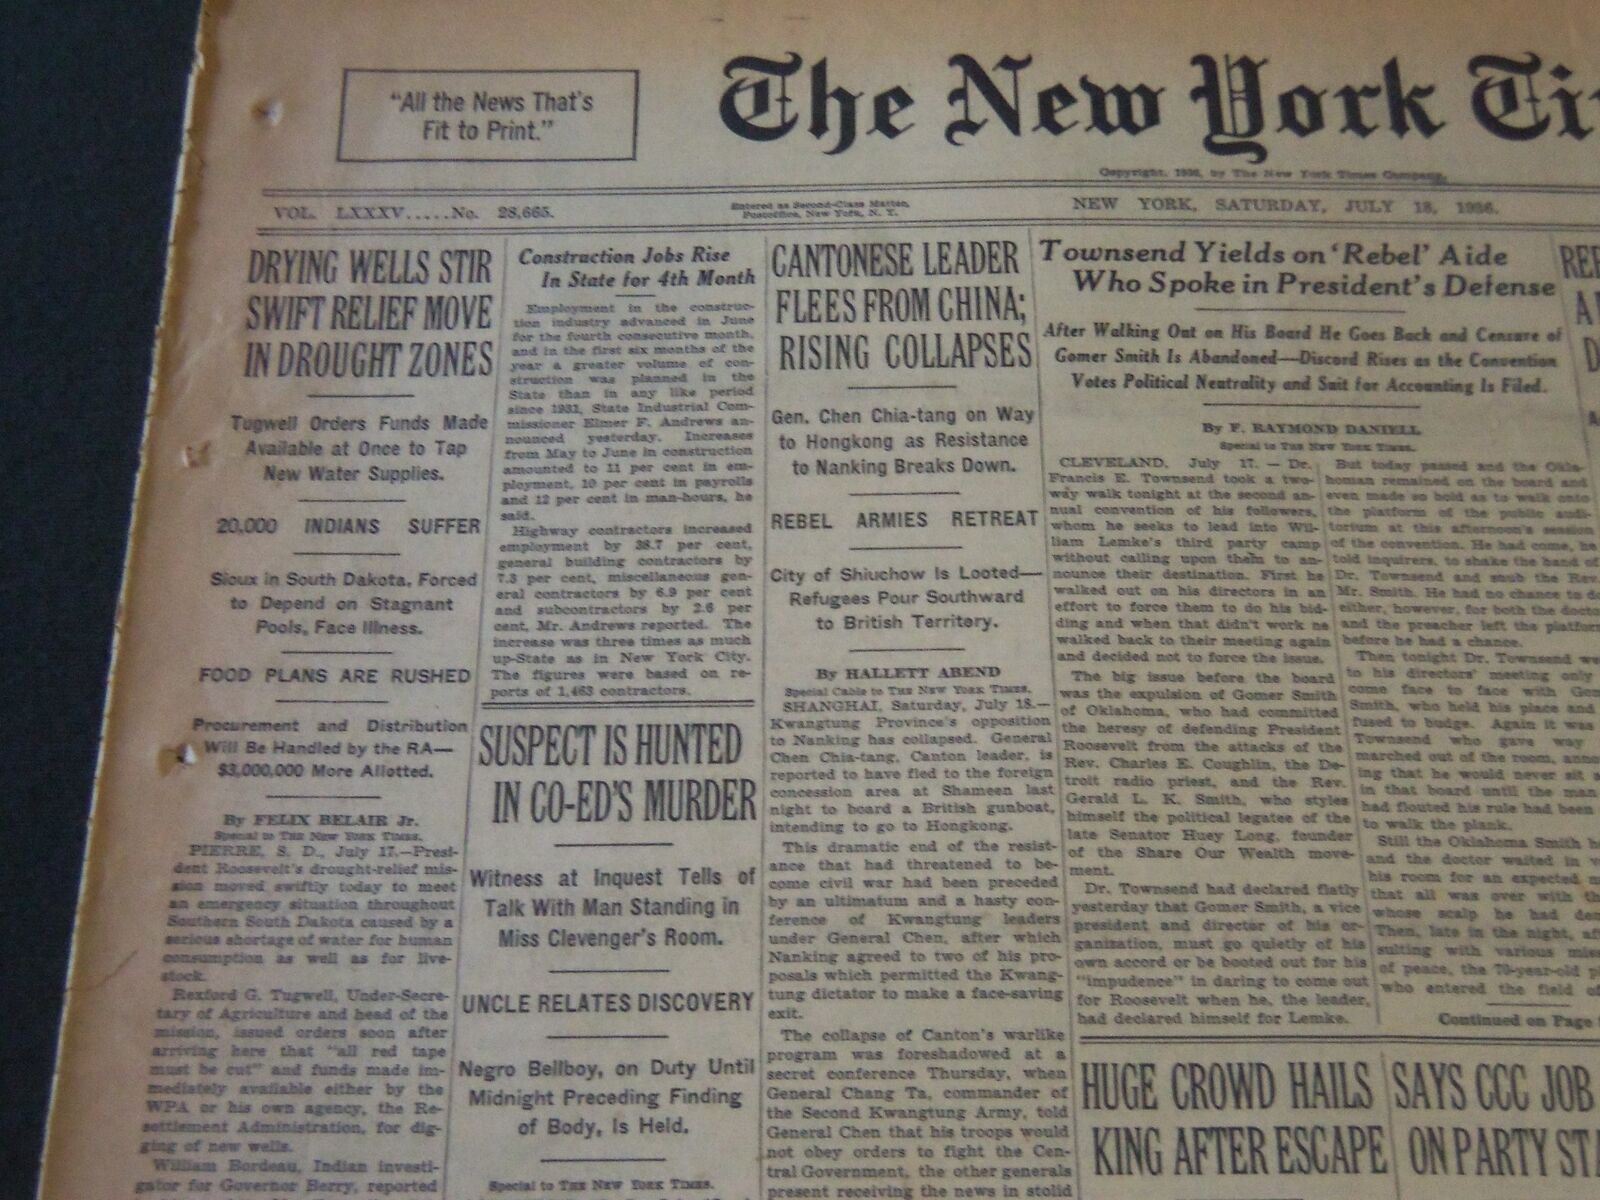 1936 JULY 18 NEW YORK TIMES - DRYING WELLS STIR RELIEF IN DROUGHT ZONES- NT 6723